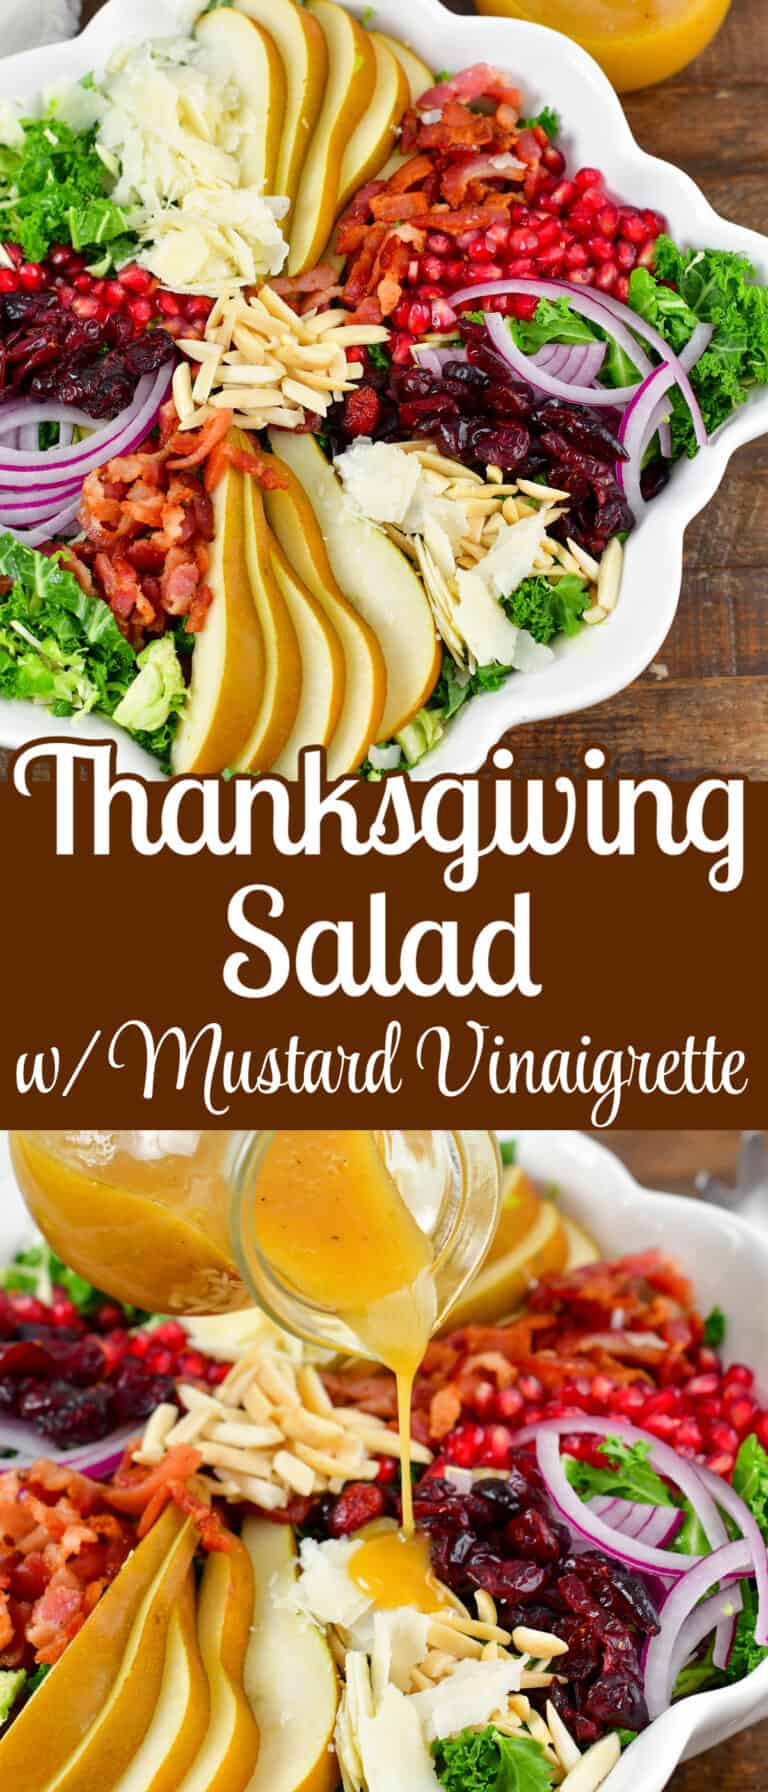 Thanksgiving Salad - Will Cook For Smiles